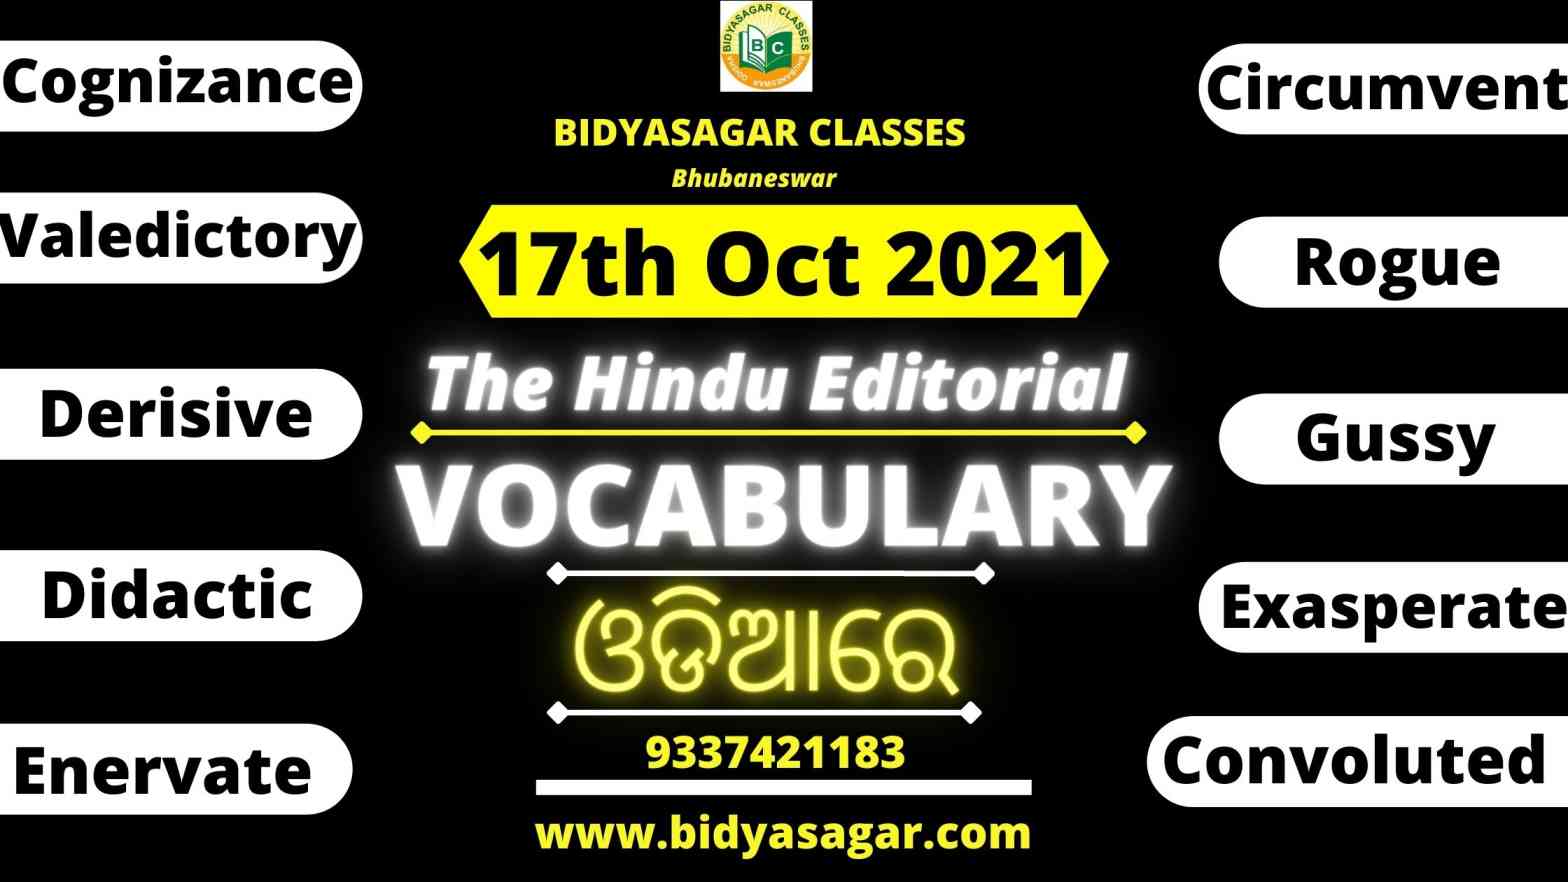 The Hindu Editorial Vocabulary of 17th October 2021